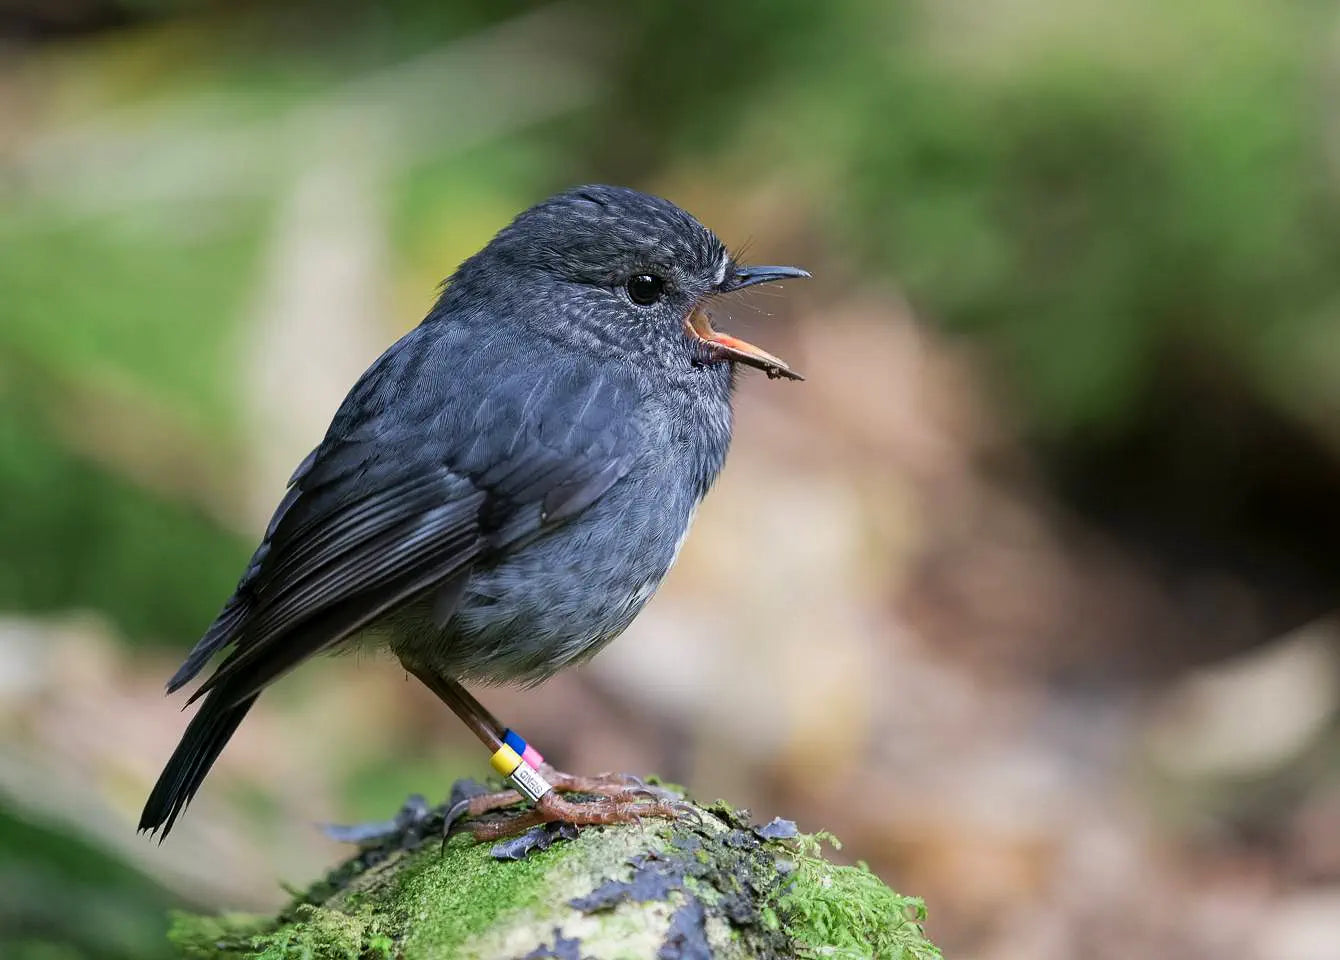 A grey bird with leg bands singing on a mossy stump.